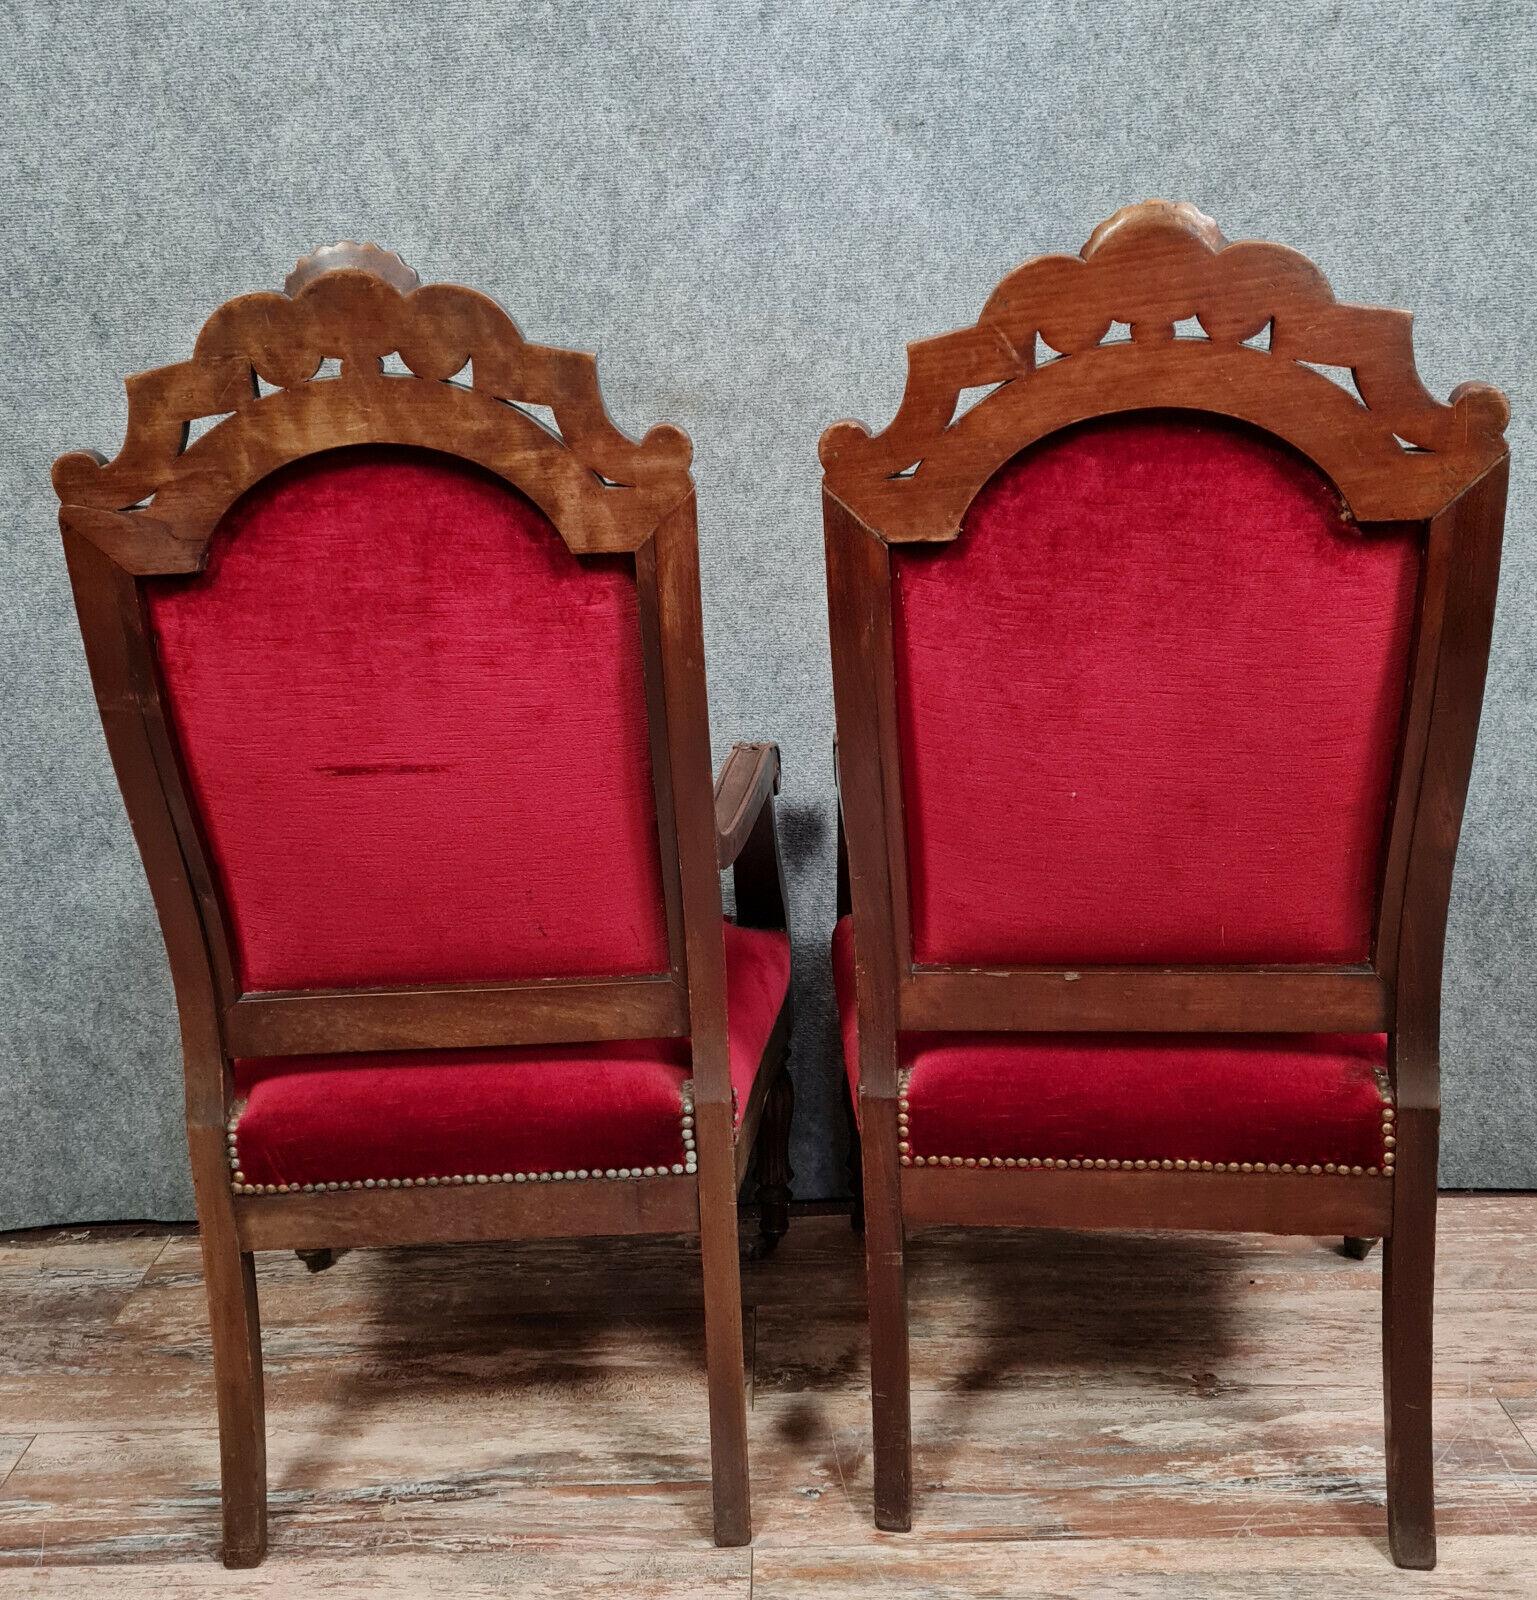 Exquisite Set of 4 Restauration Period Mahogany Chairs, circa 1820 -1X32 For Sale 3